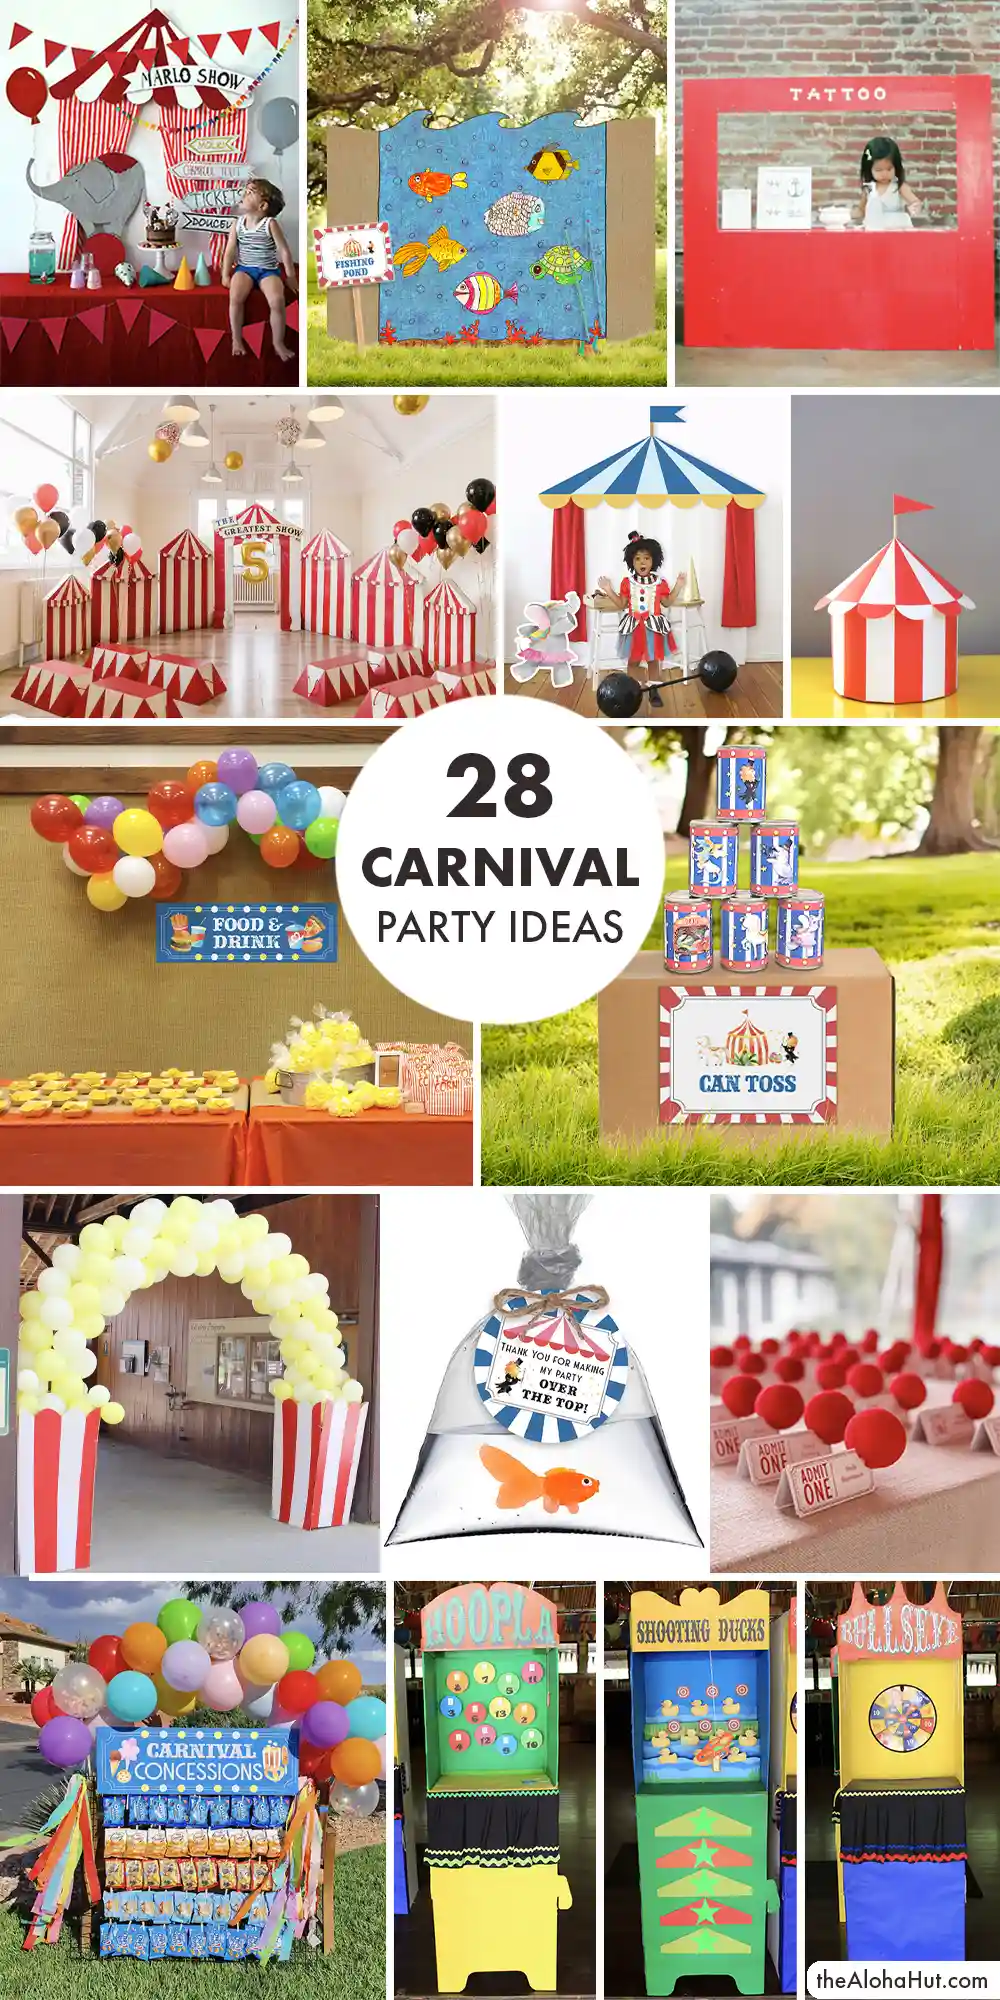 Carnival Party Ideas - Circus Party Ideas